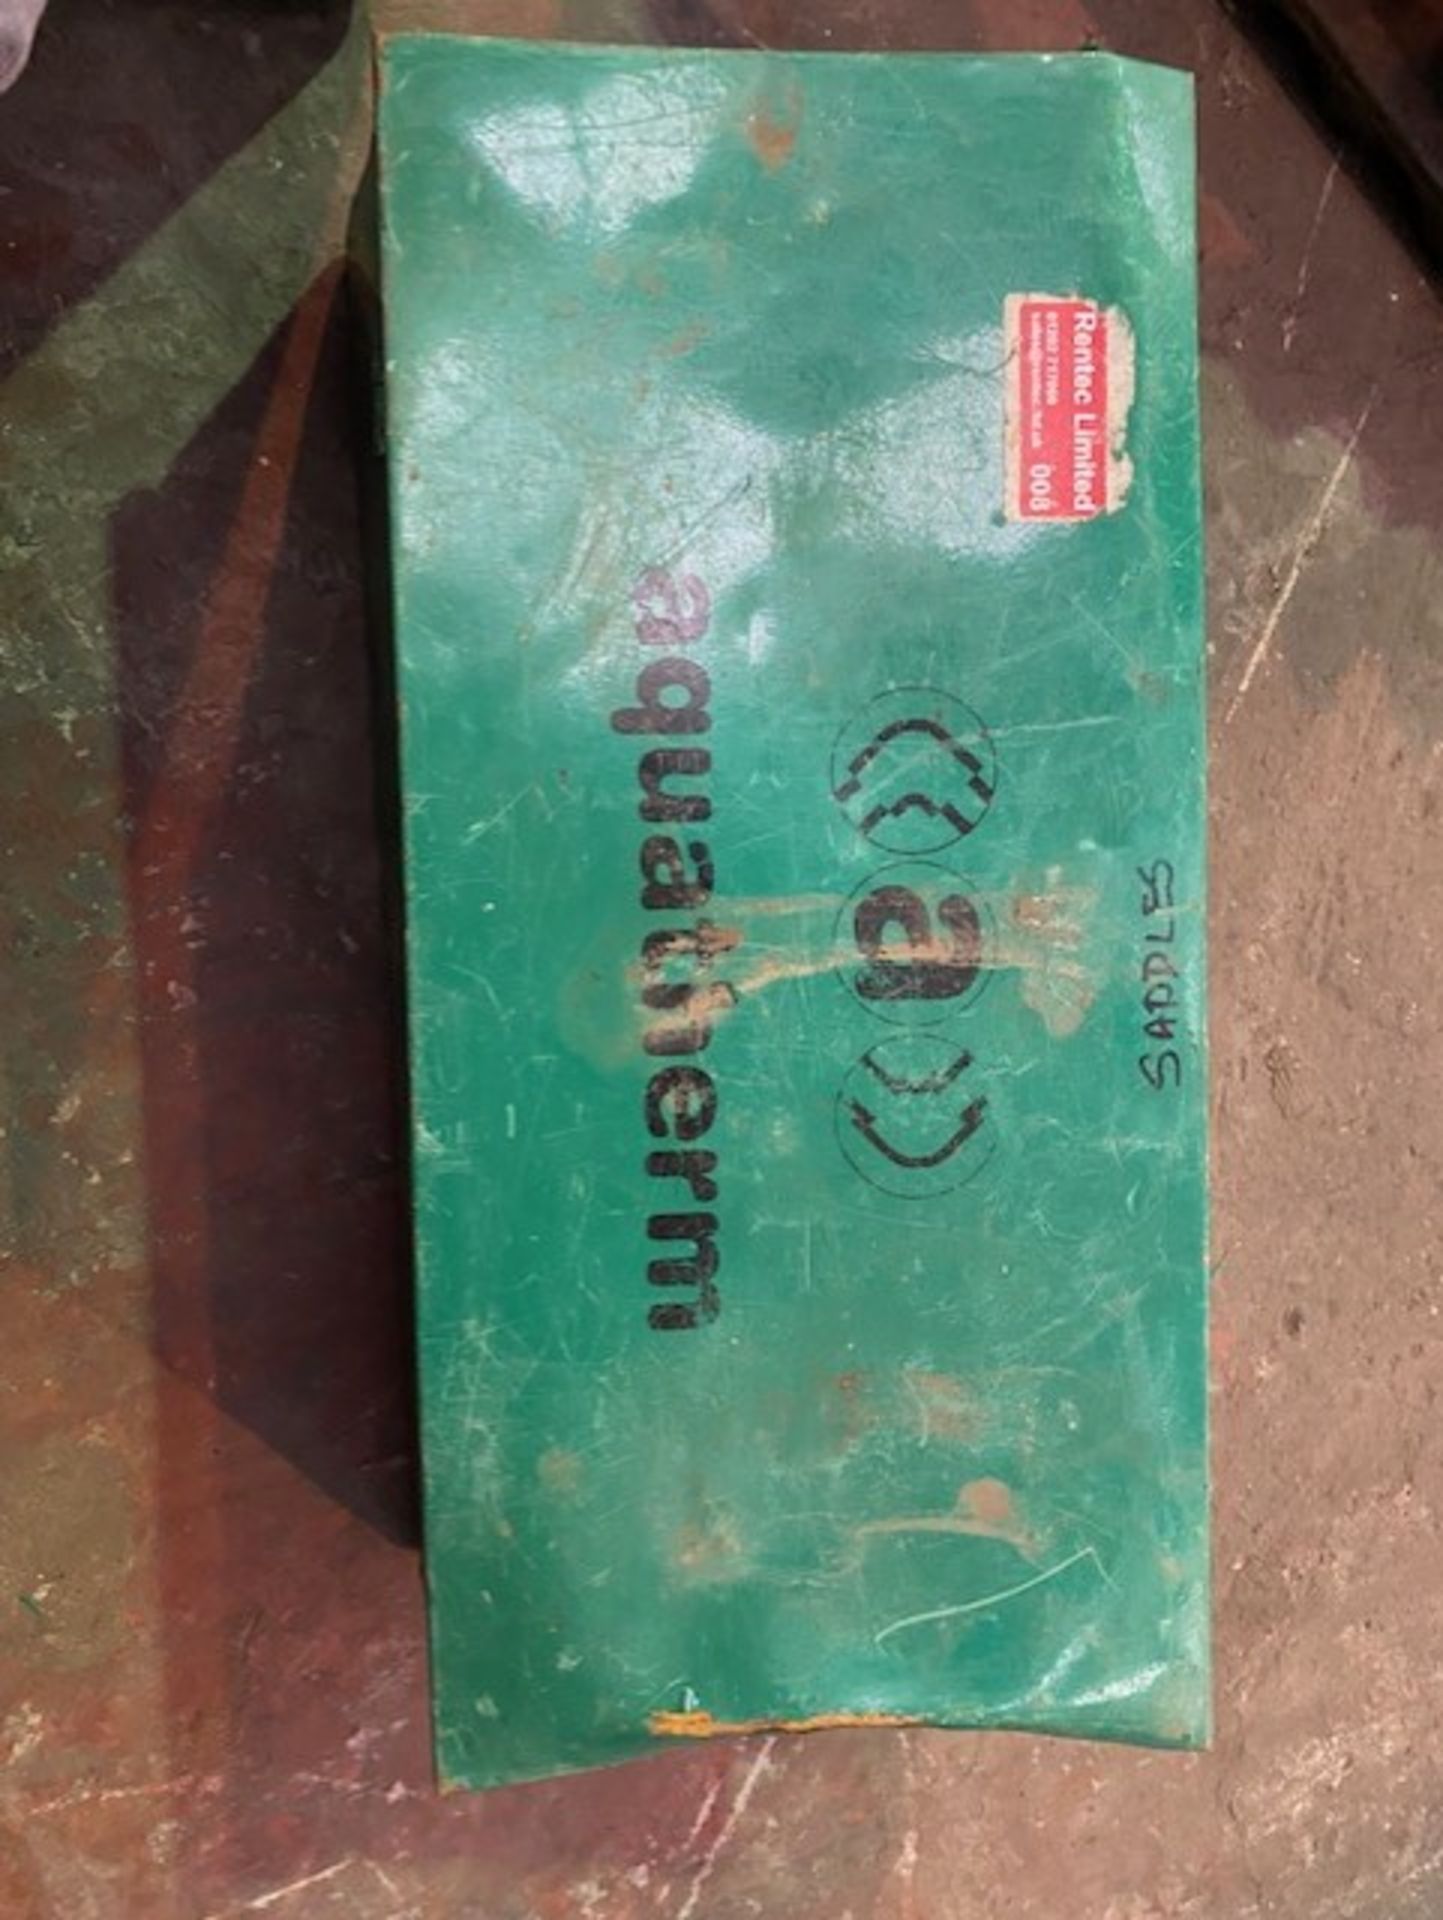 Aquatherm AQ63TFE 110v 63mm Held Pipe But Fusion Welder , Boxed , sold as seen - Image 2 of 2